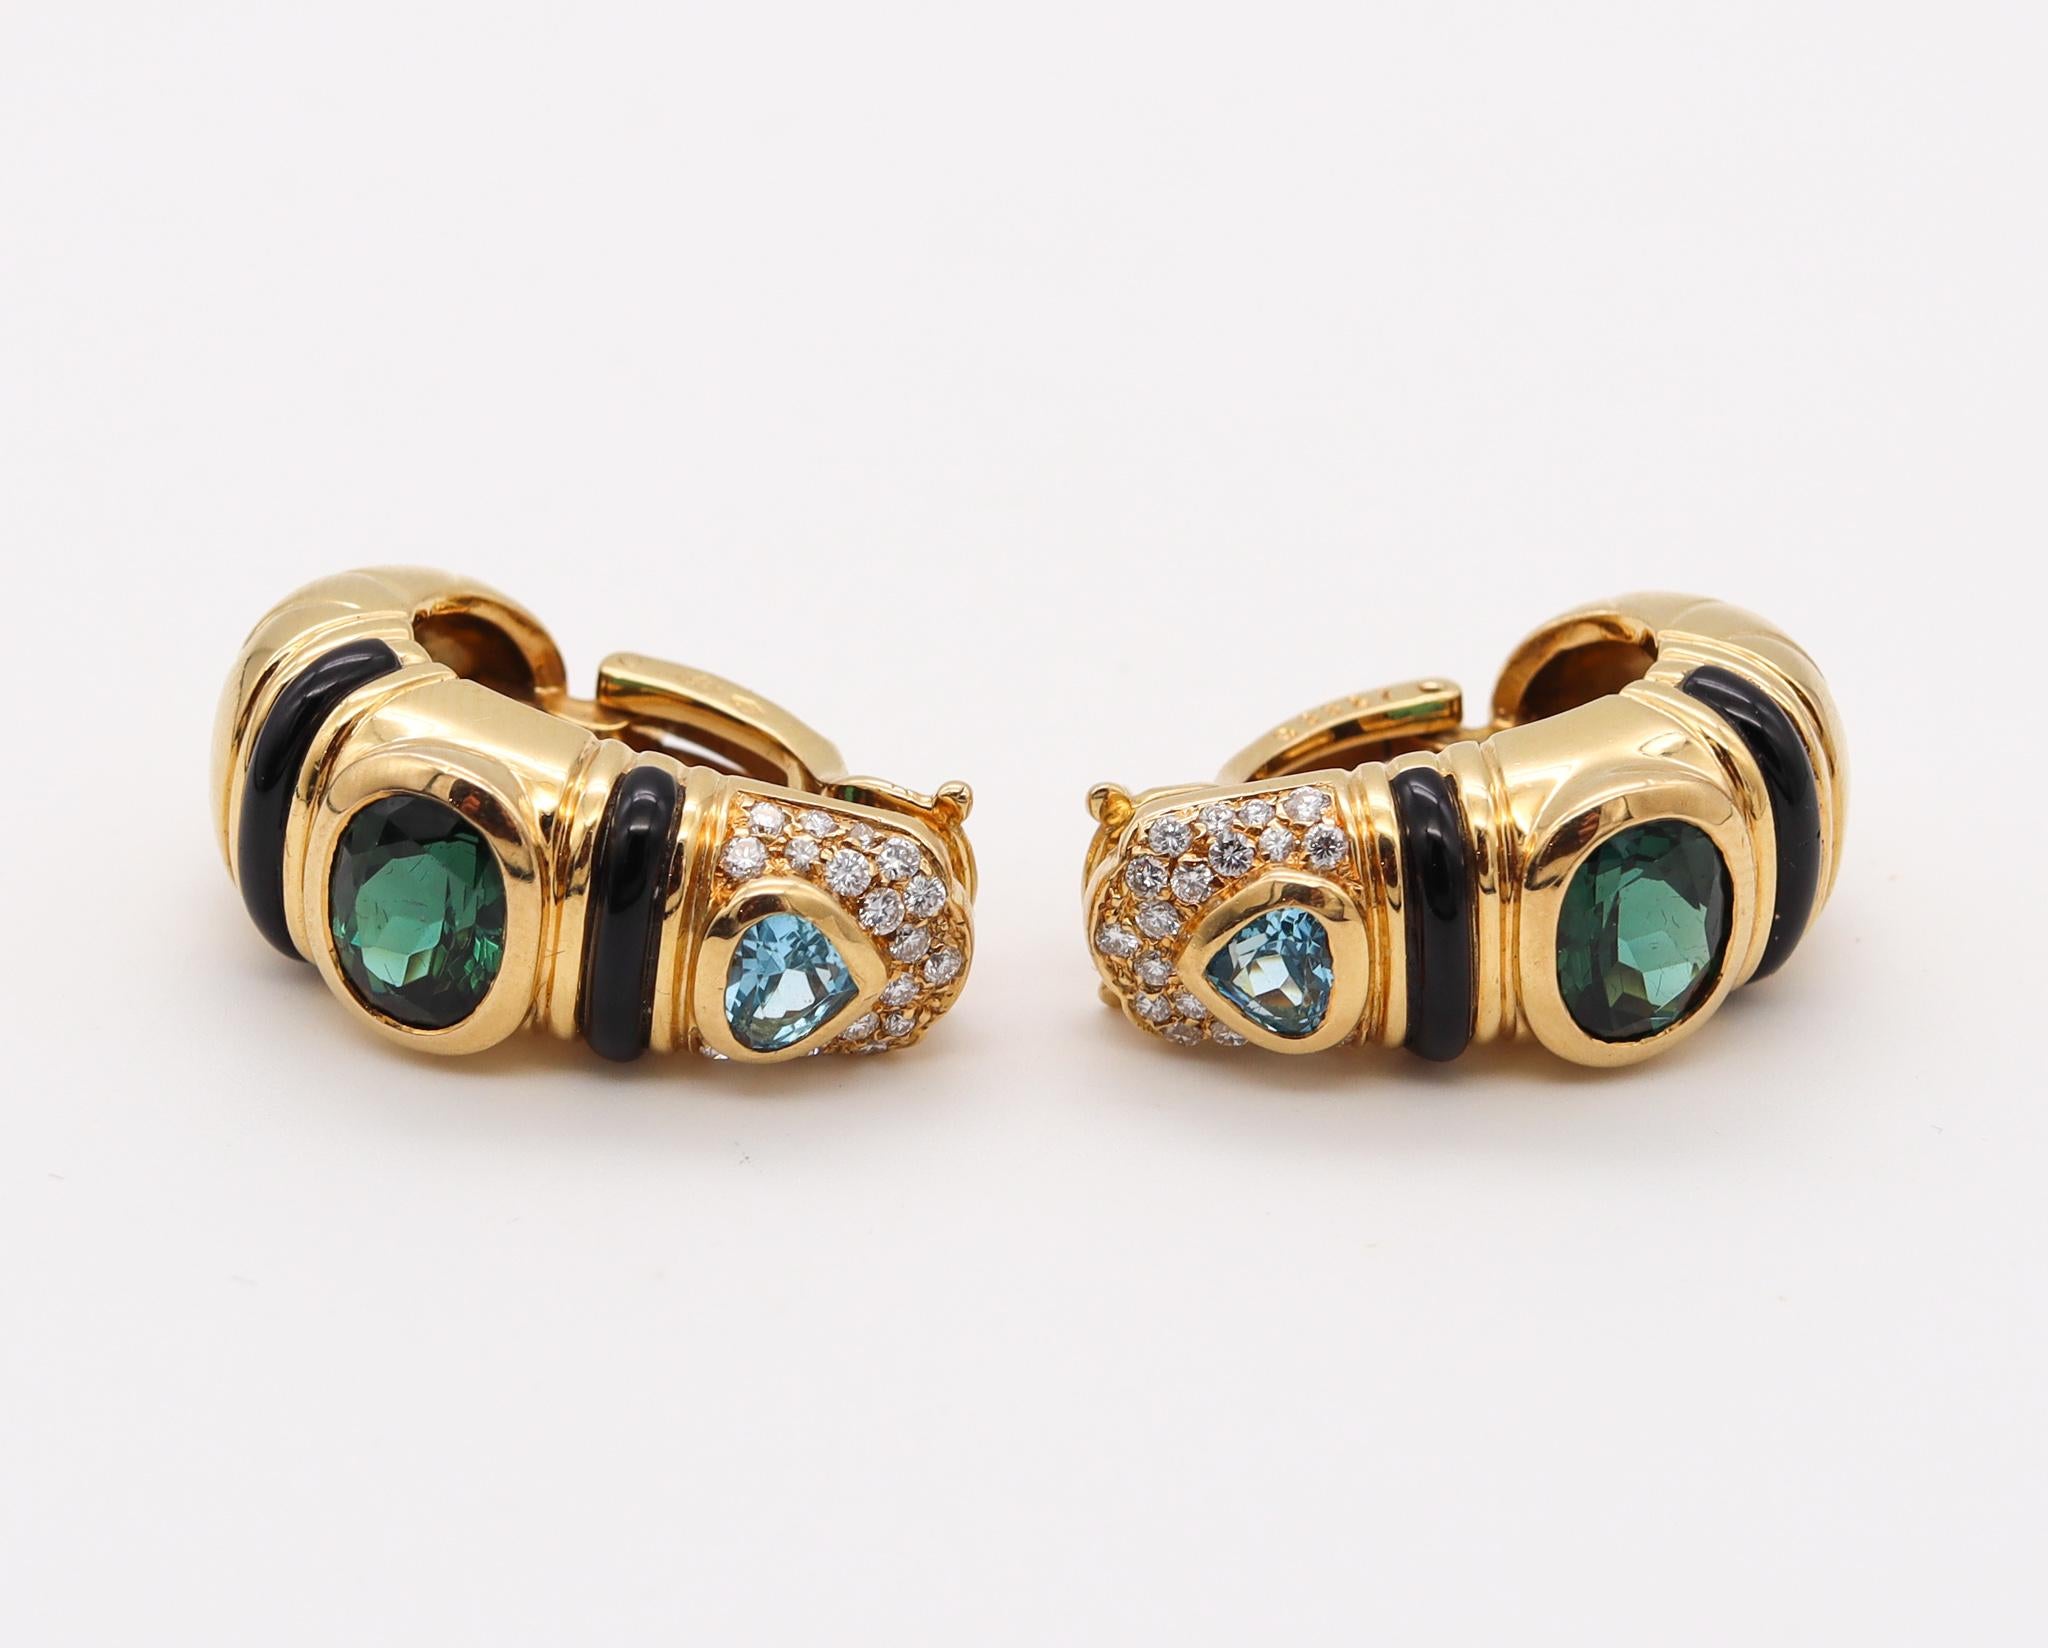 Modernist Marina B. Milan Earrings in 18Kt Yellow Gold with 8.23 Cts Diamonds & Gemstones